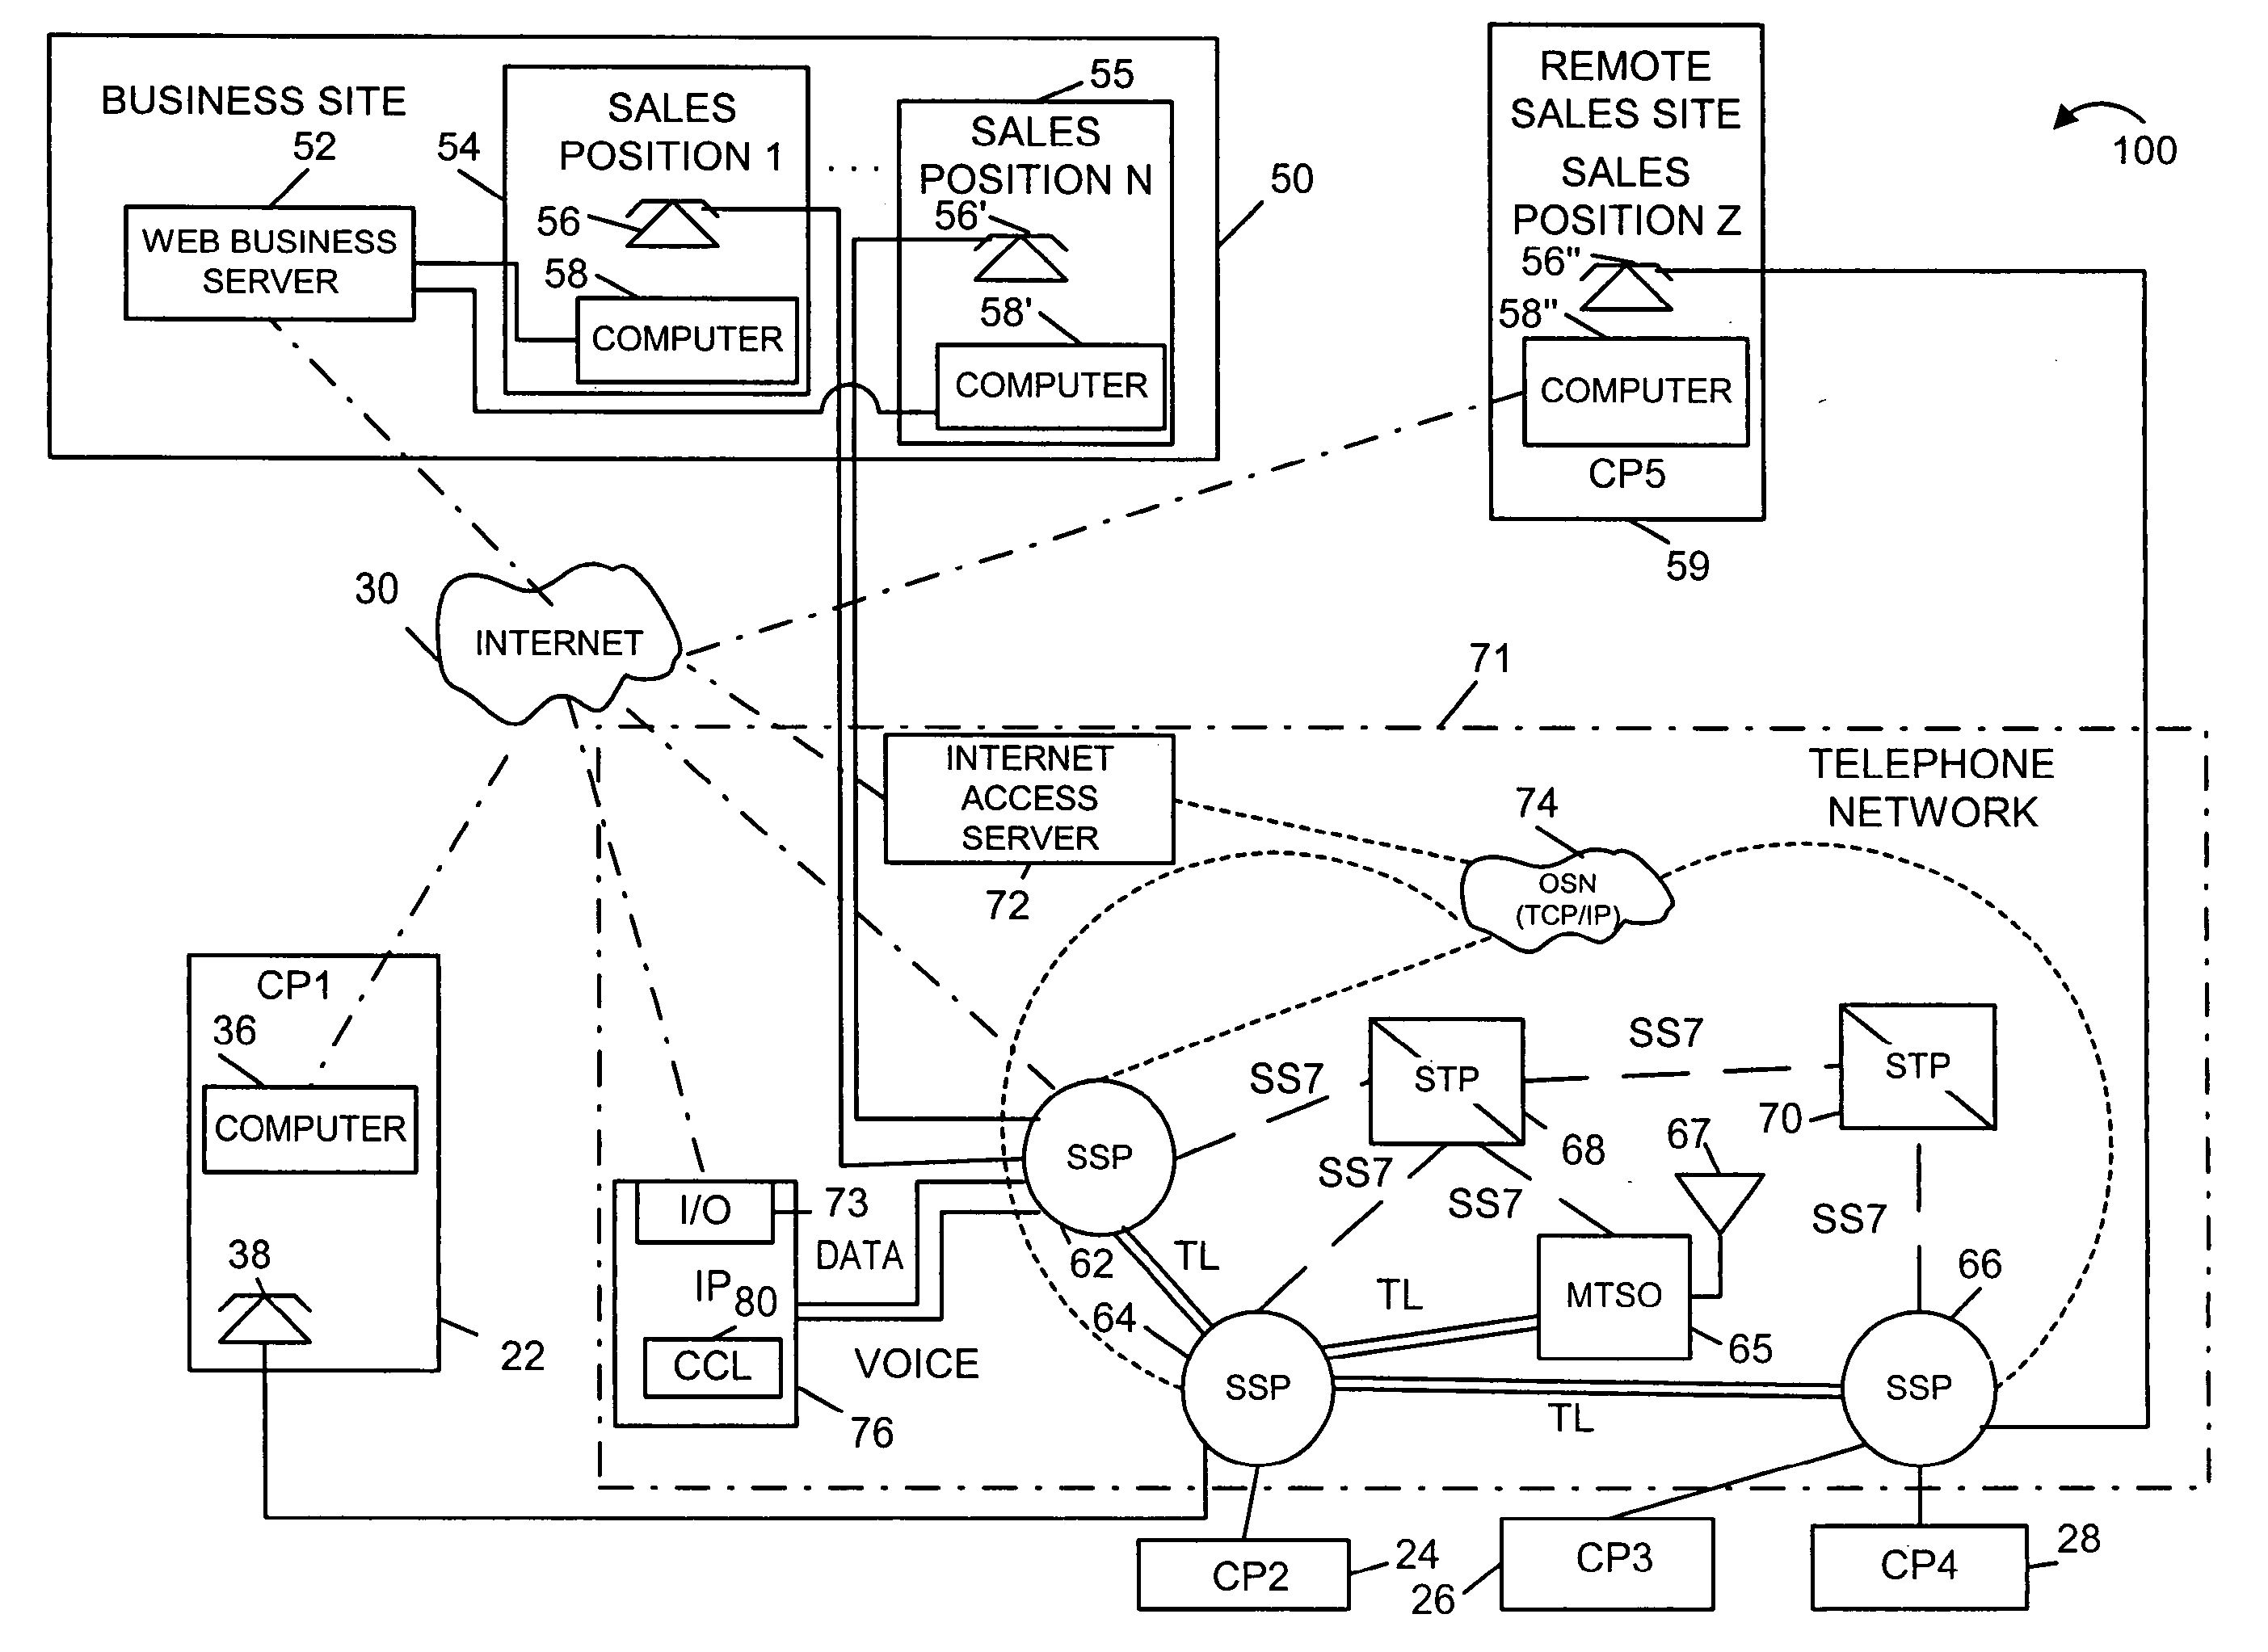 Method and apparatus for providing telephone support for internet sales